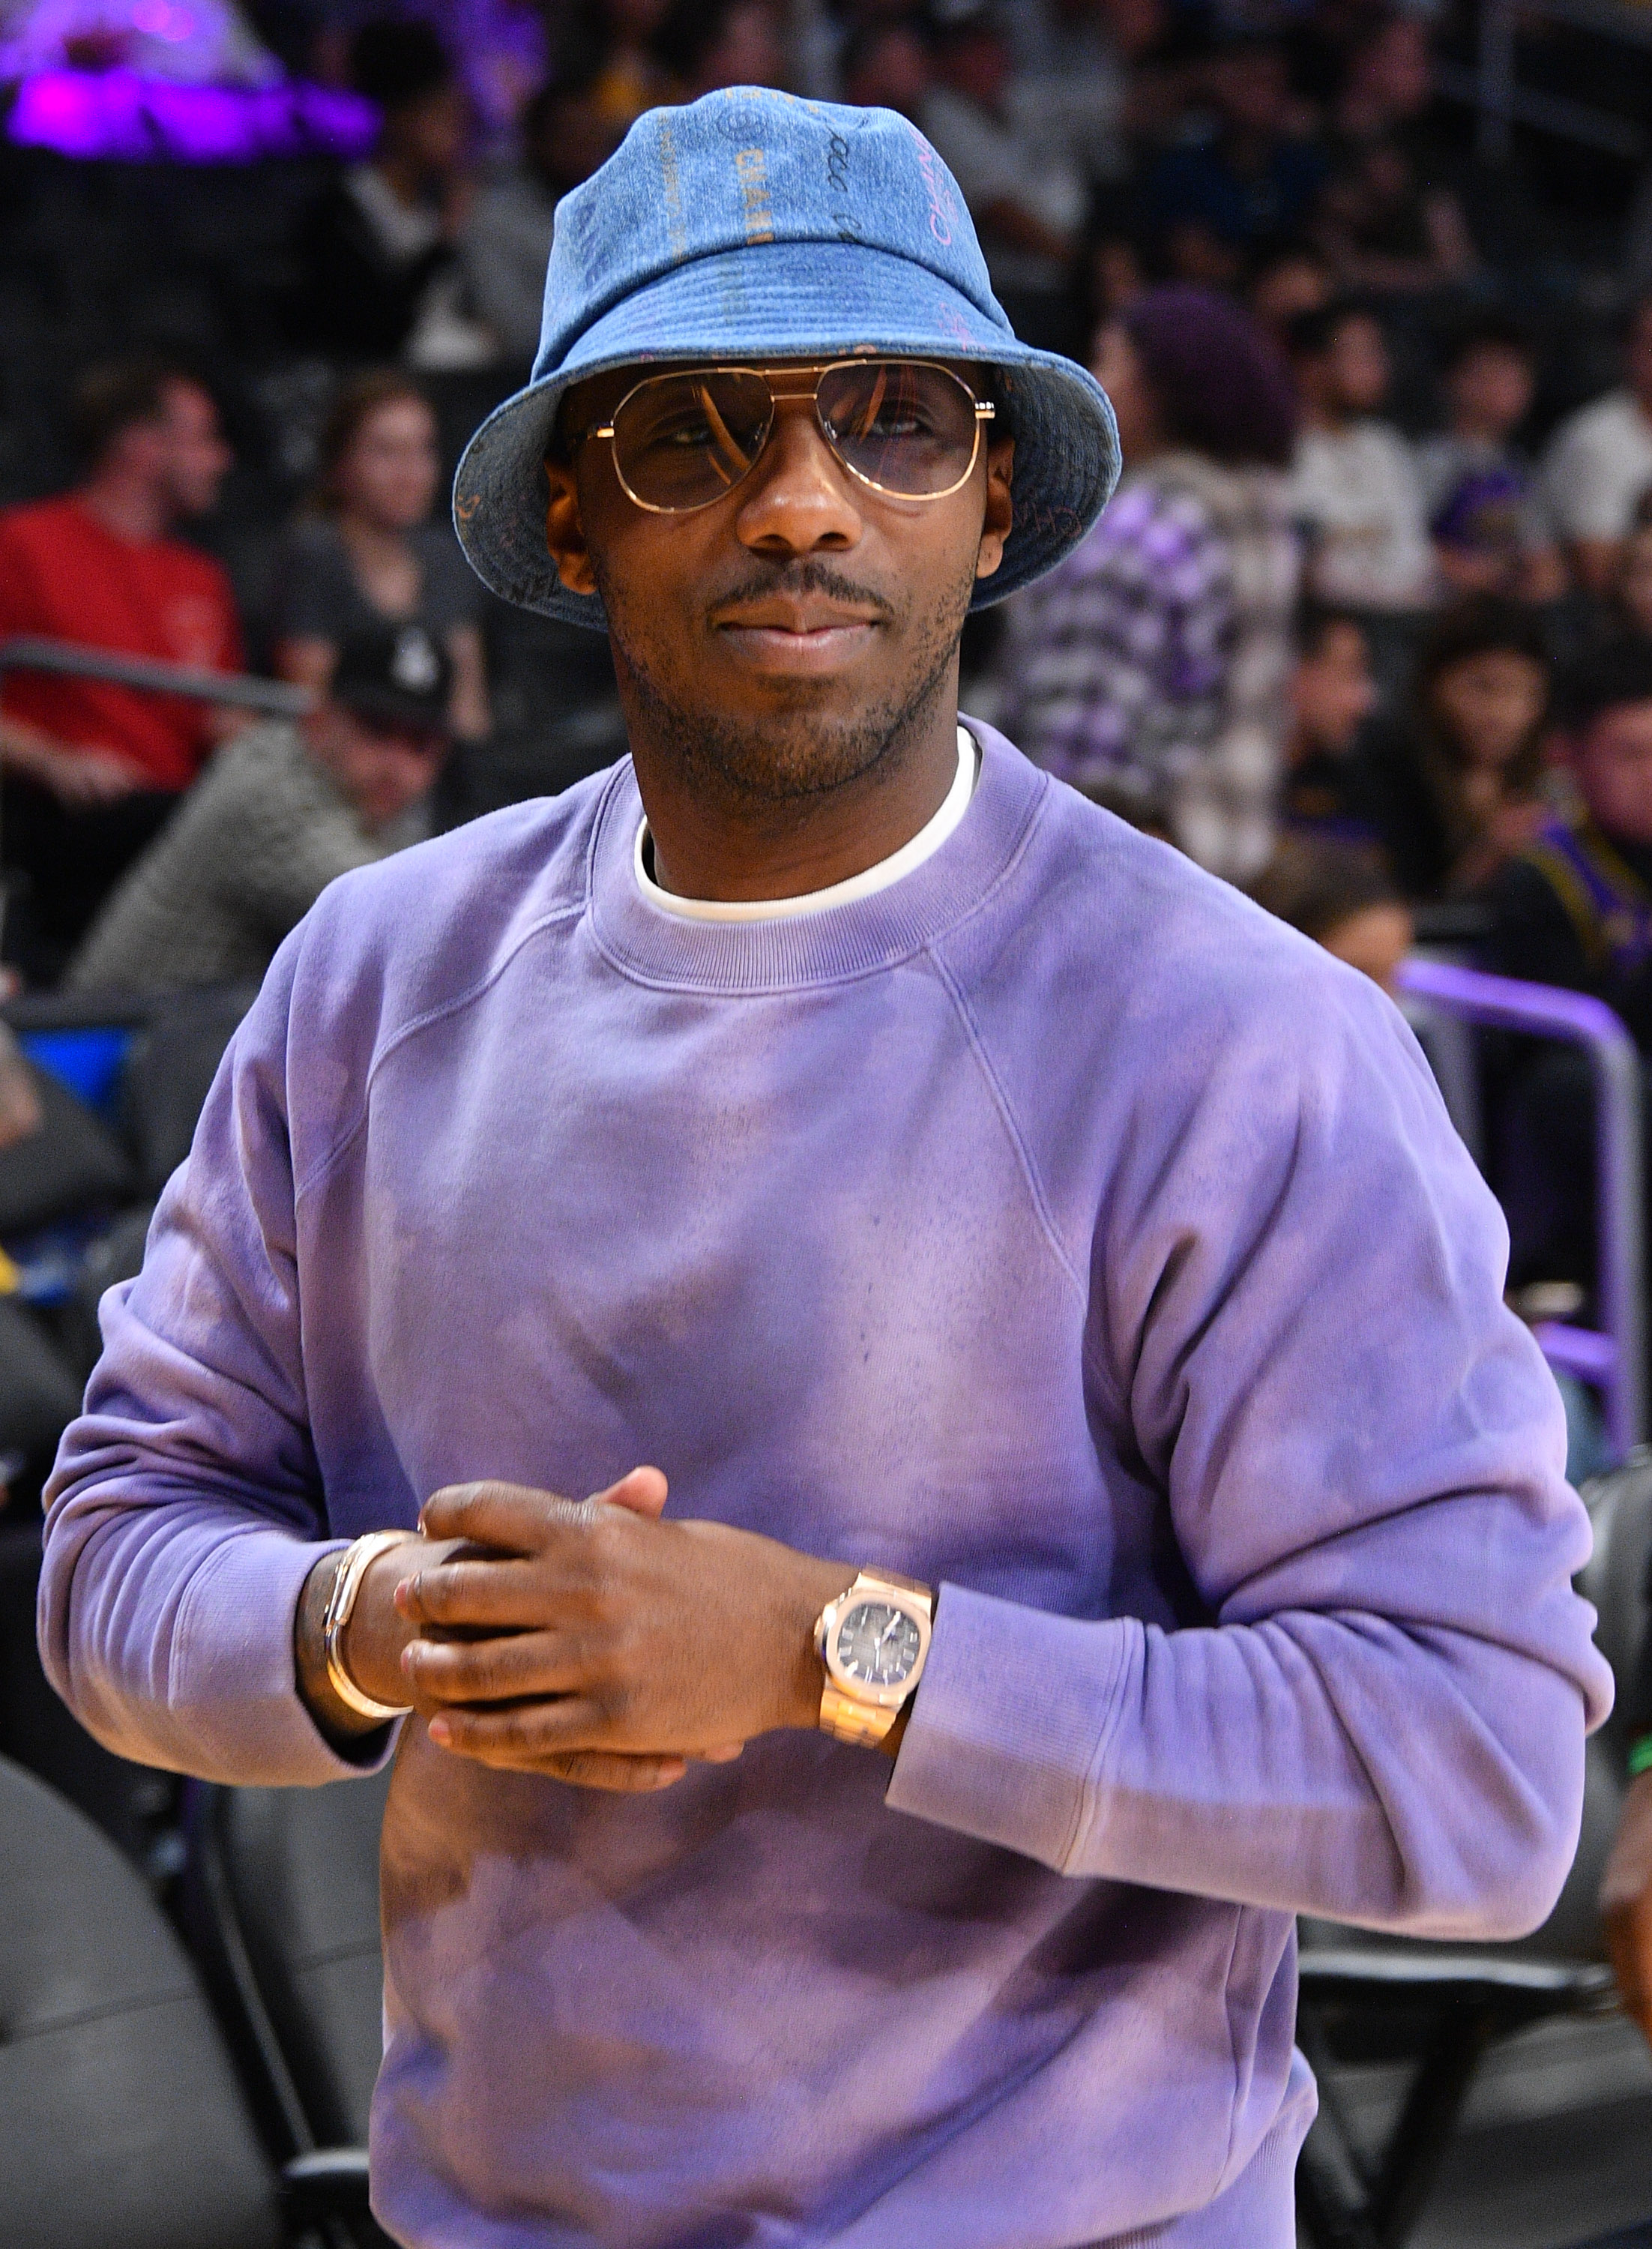 Rich Paul attends a basketball game between the Los Angeles Lakers and the Utah Jazz in Los Angeles, California on April 09, 2023 | Source: Getty Images